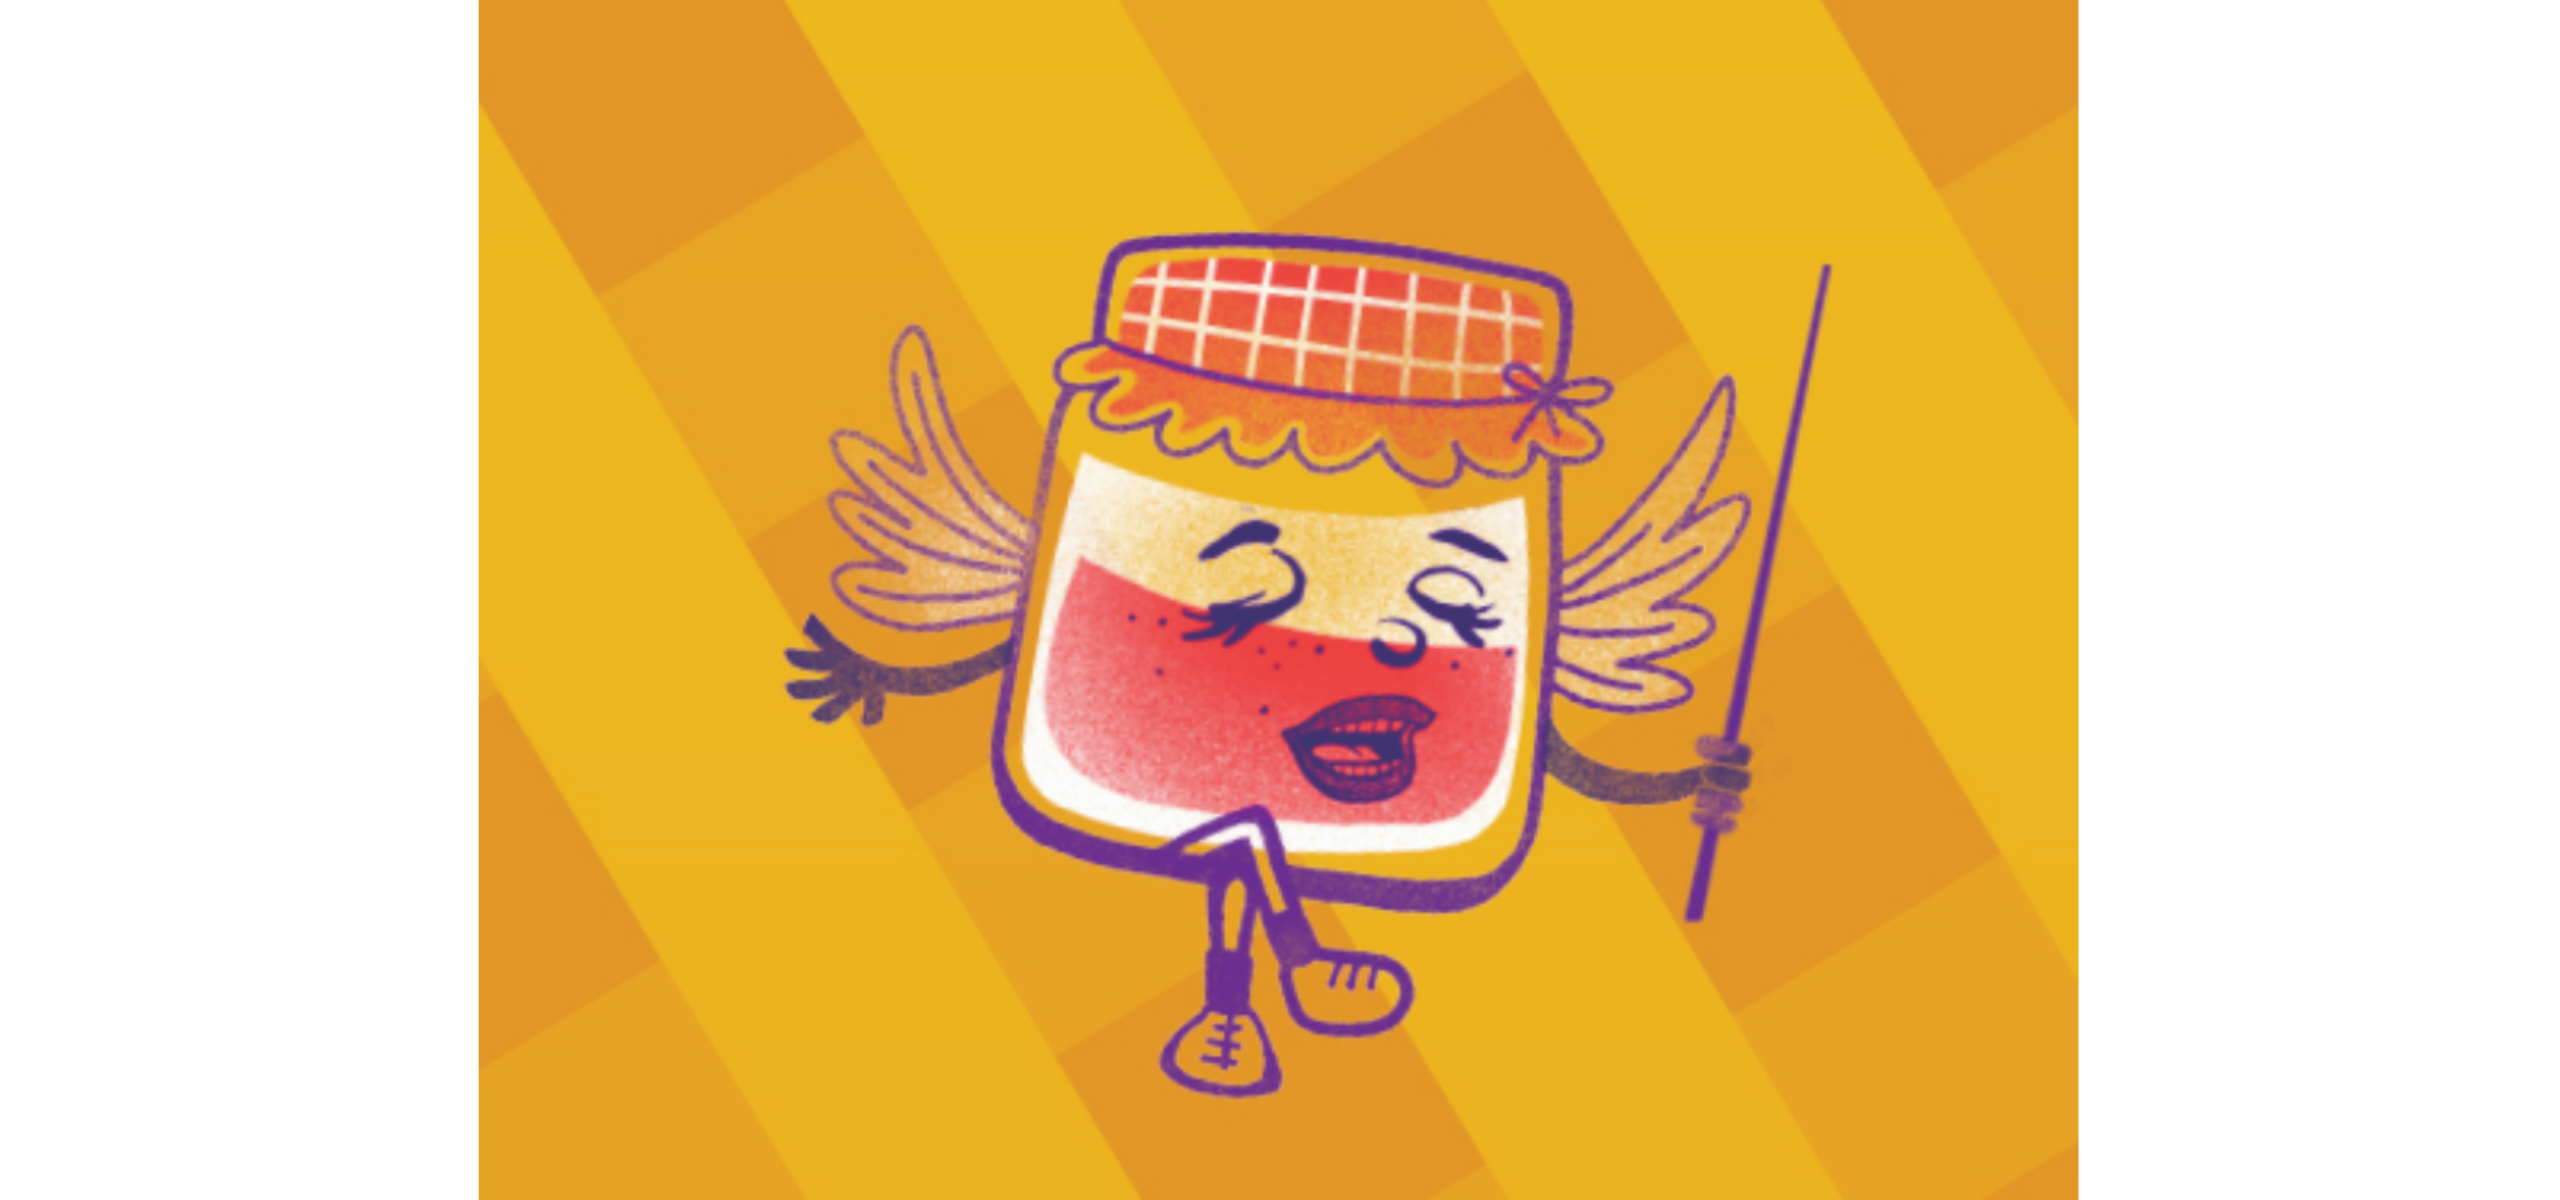 yellow and orange graphic with purple jar of jam with arms, legs, wings, and a face